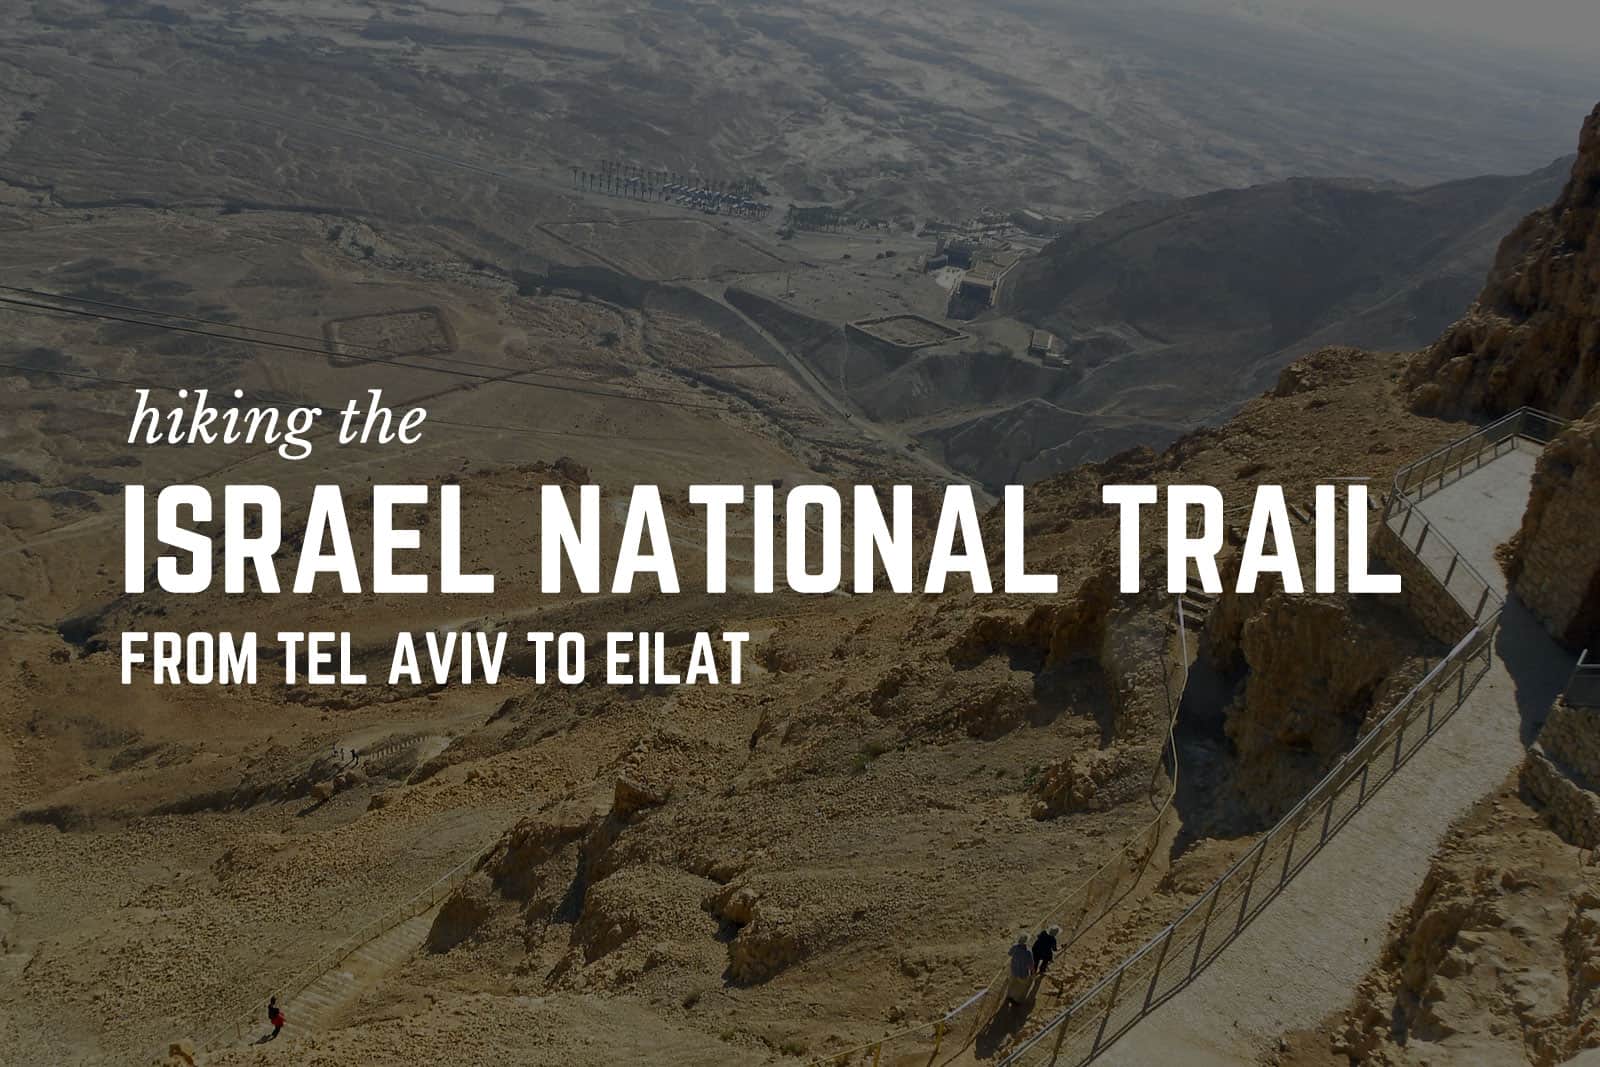 Hiking the Israel National Trail from Tel Aviv to Eilat